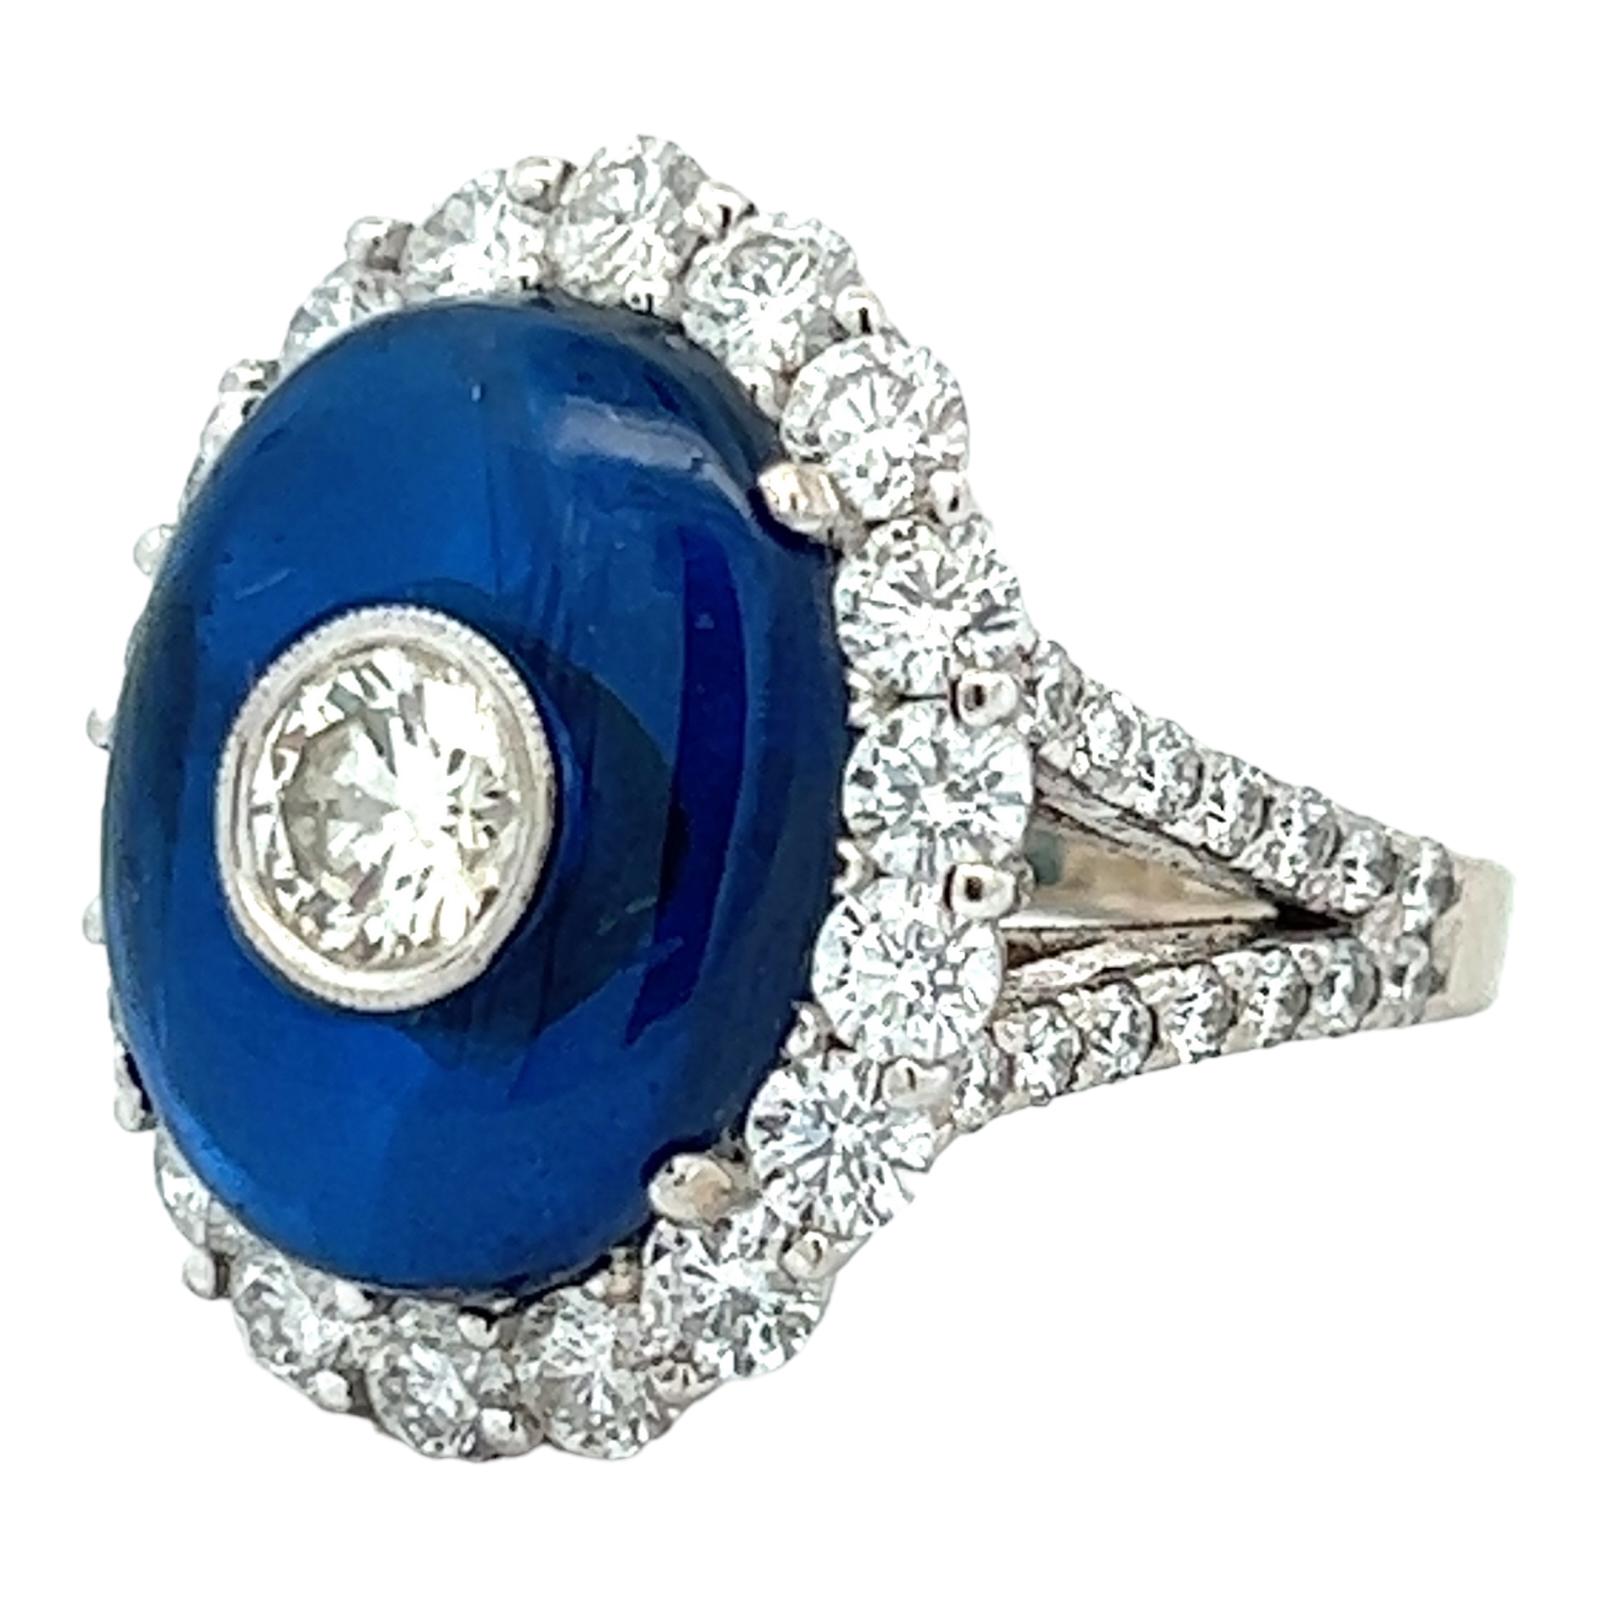 Stunning Art Deco style bezel set diamond and blue spinel cocktail ring. The ring features a bezel set .62 carat round brilliant cut diamond (K/SI) surrounded by a beautiful blue spinel cabochon gemstone. The mounting features approximately 3.50 CTW